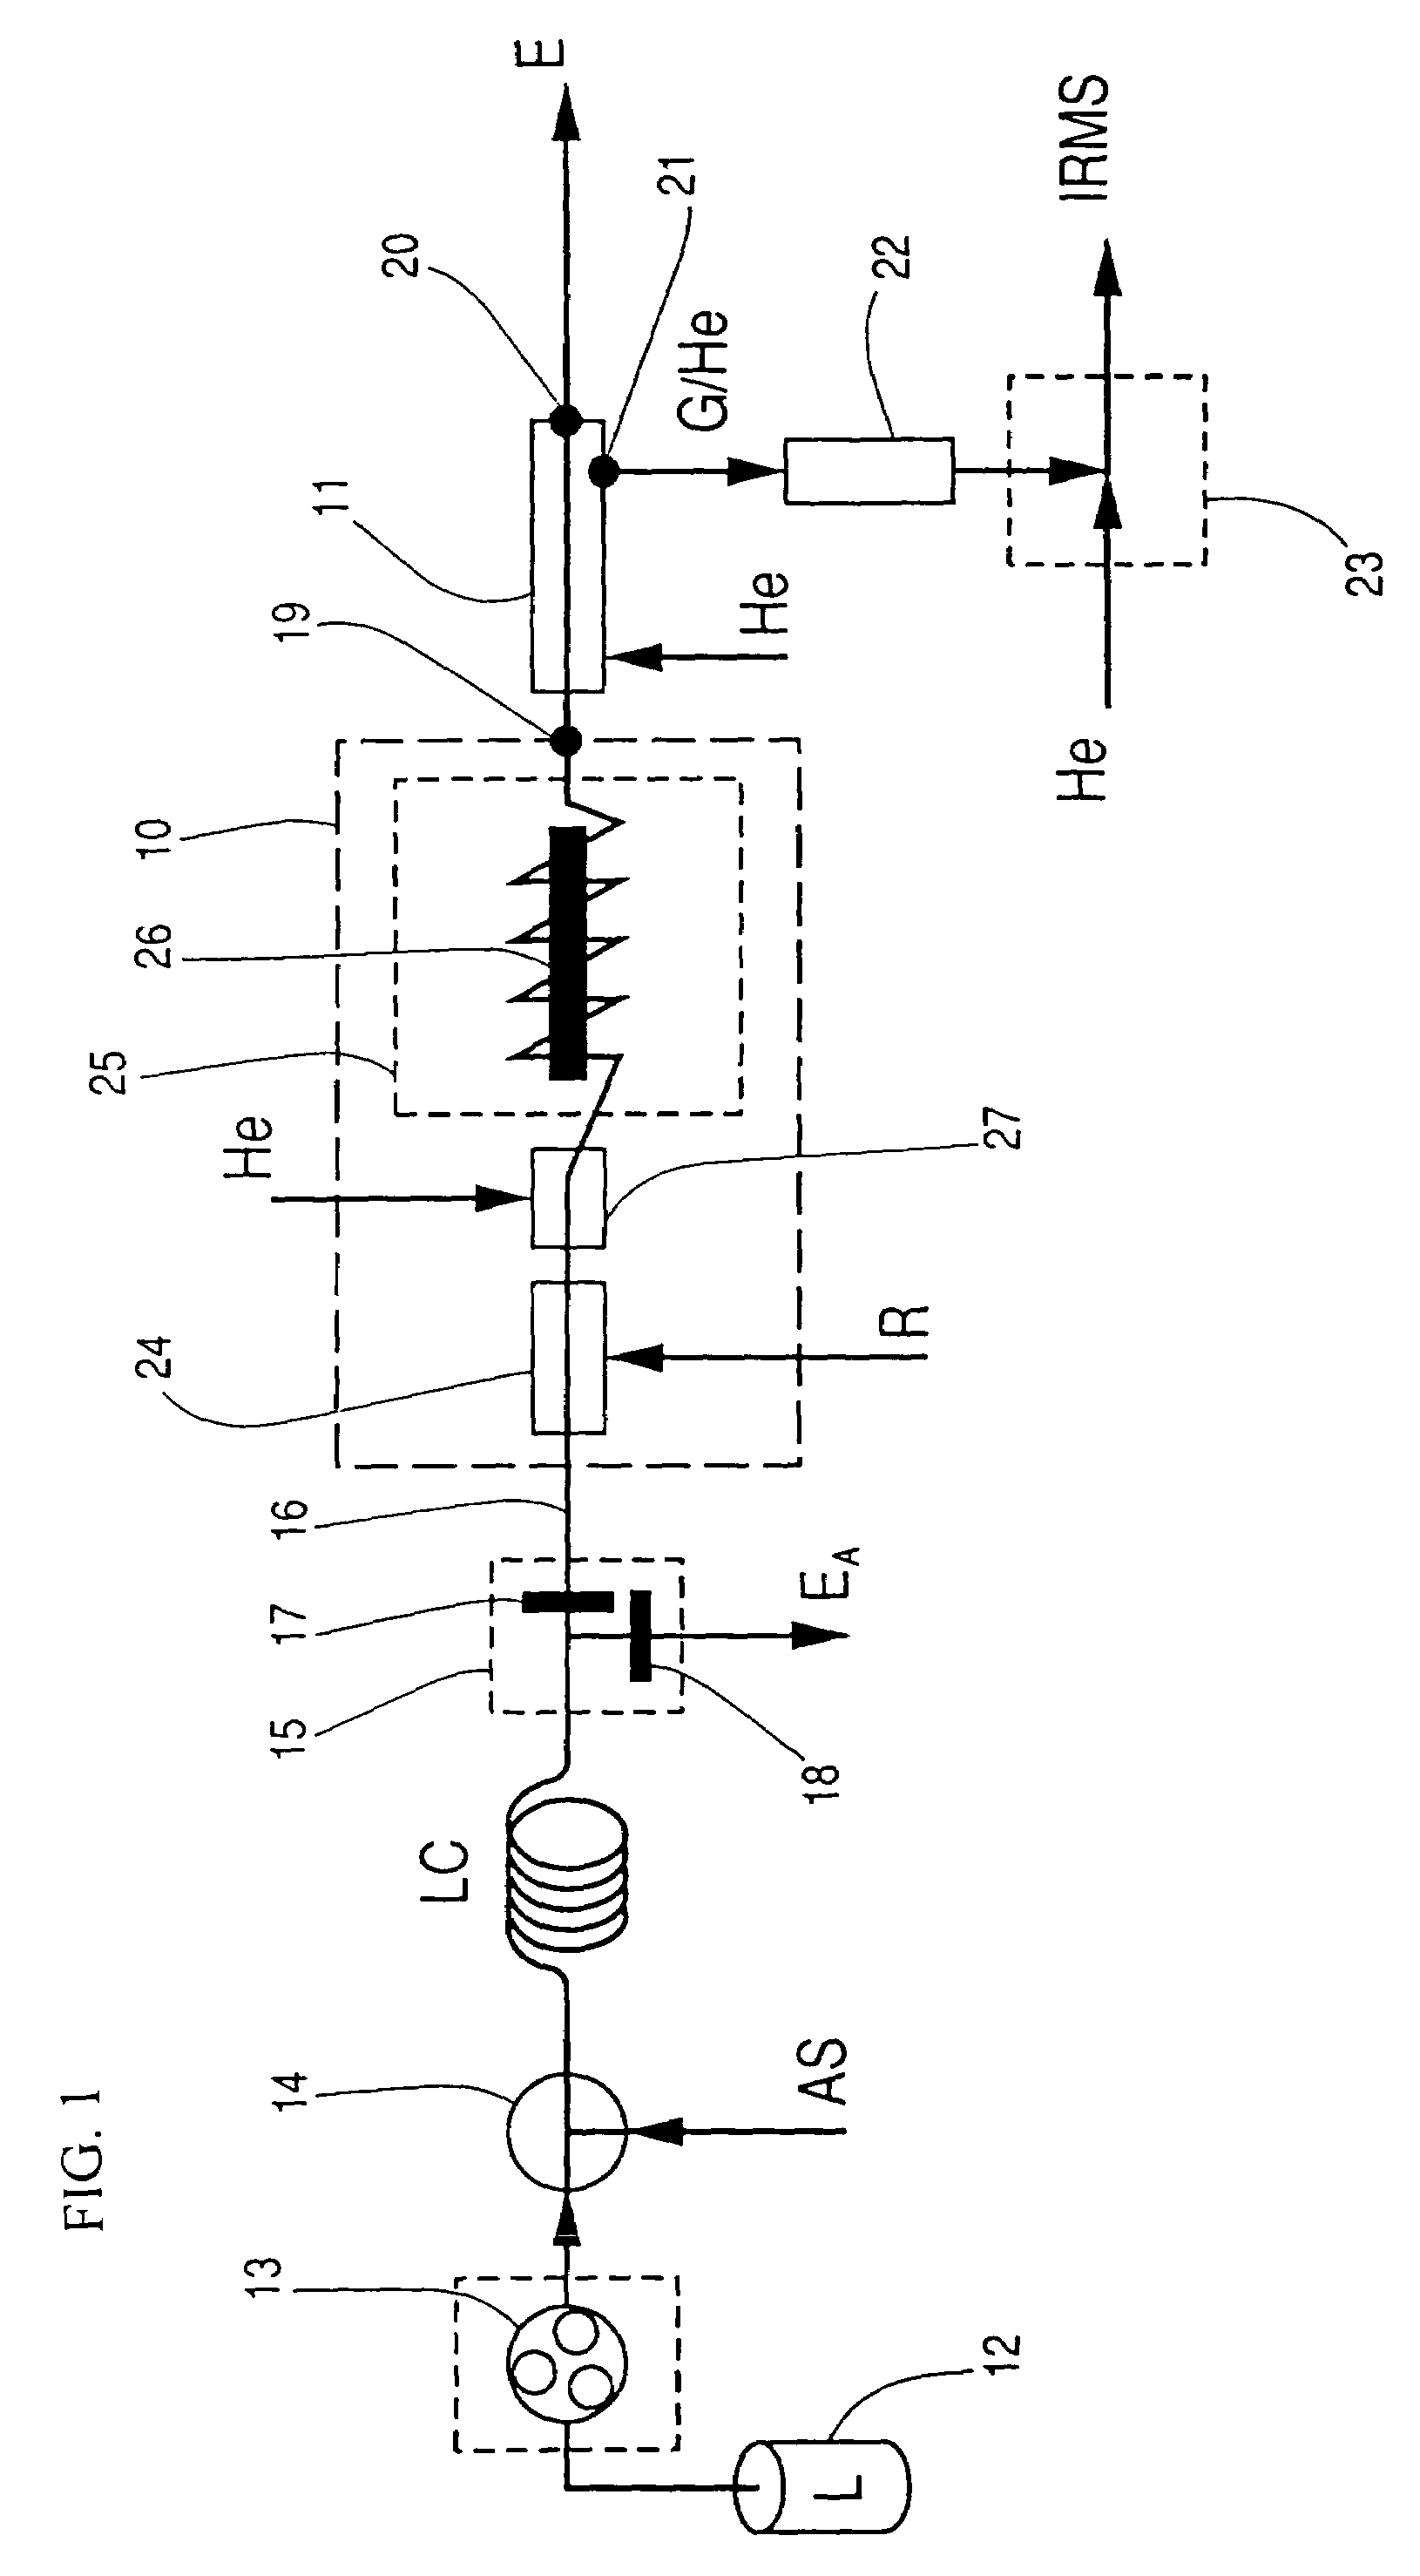 Process and apparatus for providing gas for isotopic ratio analysis